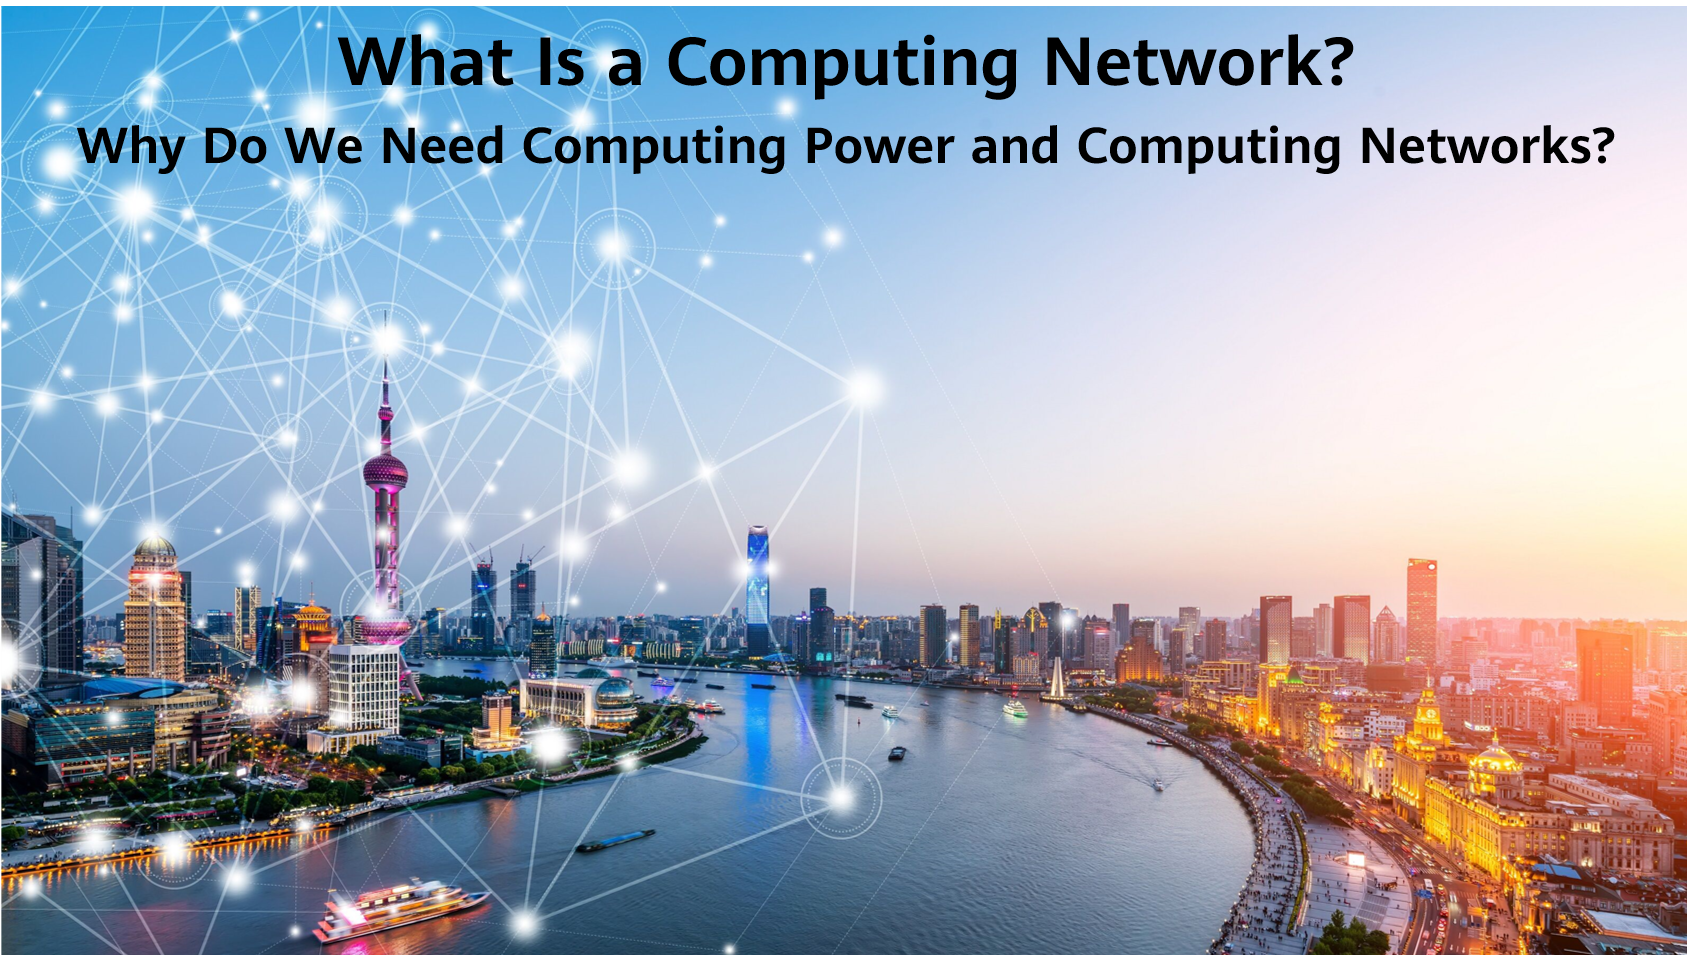 What Is a Computing Network? Why Do We Need Computing Power and Computing Networks?